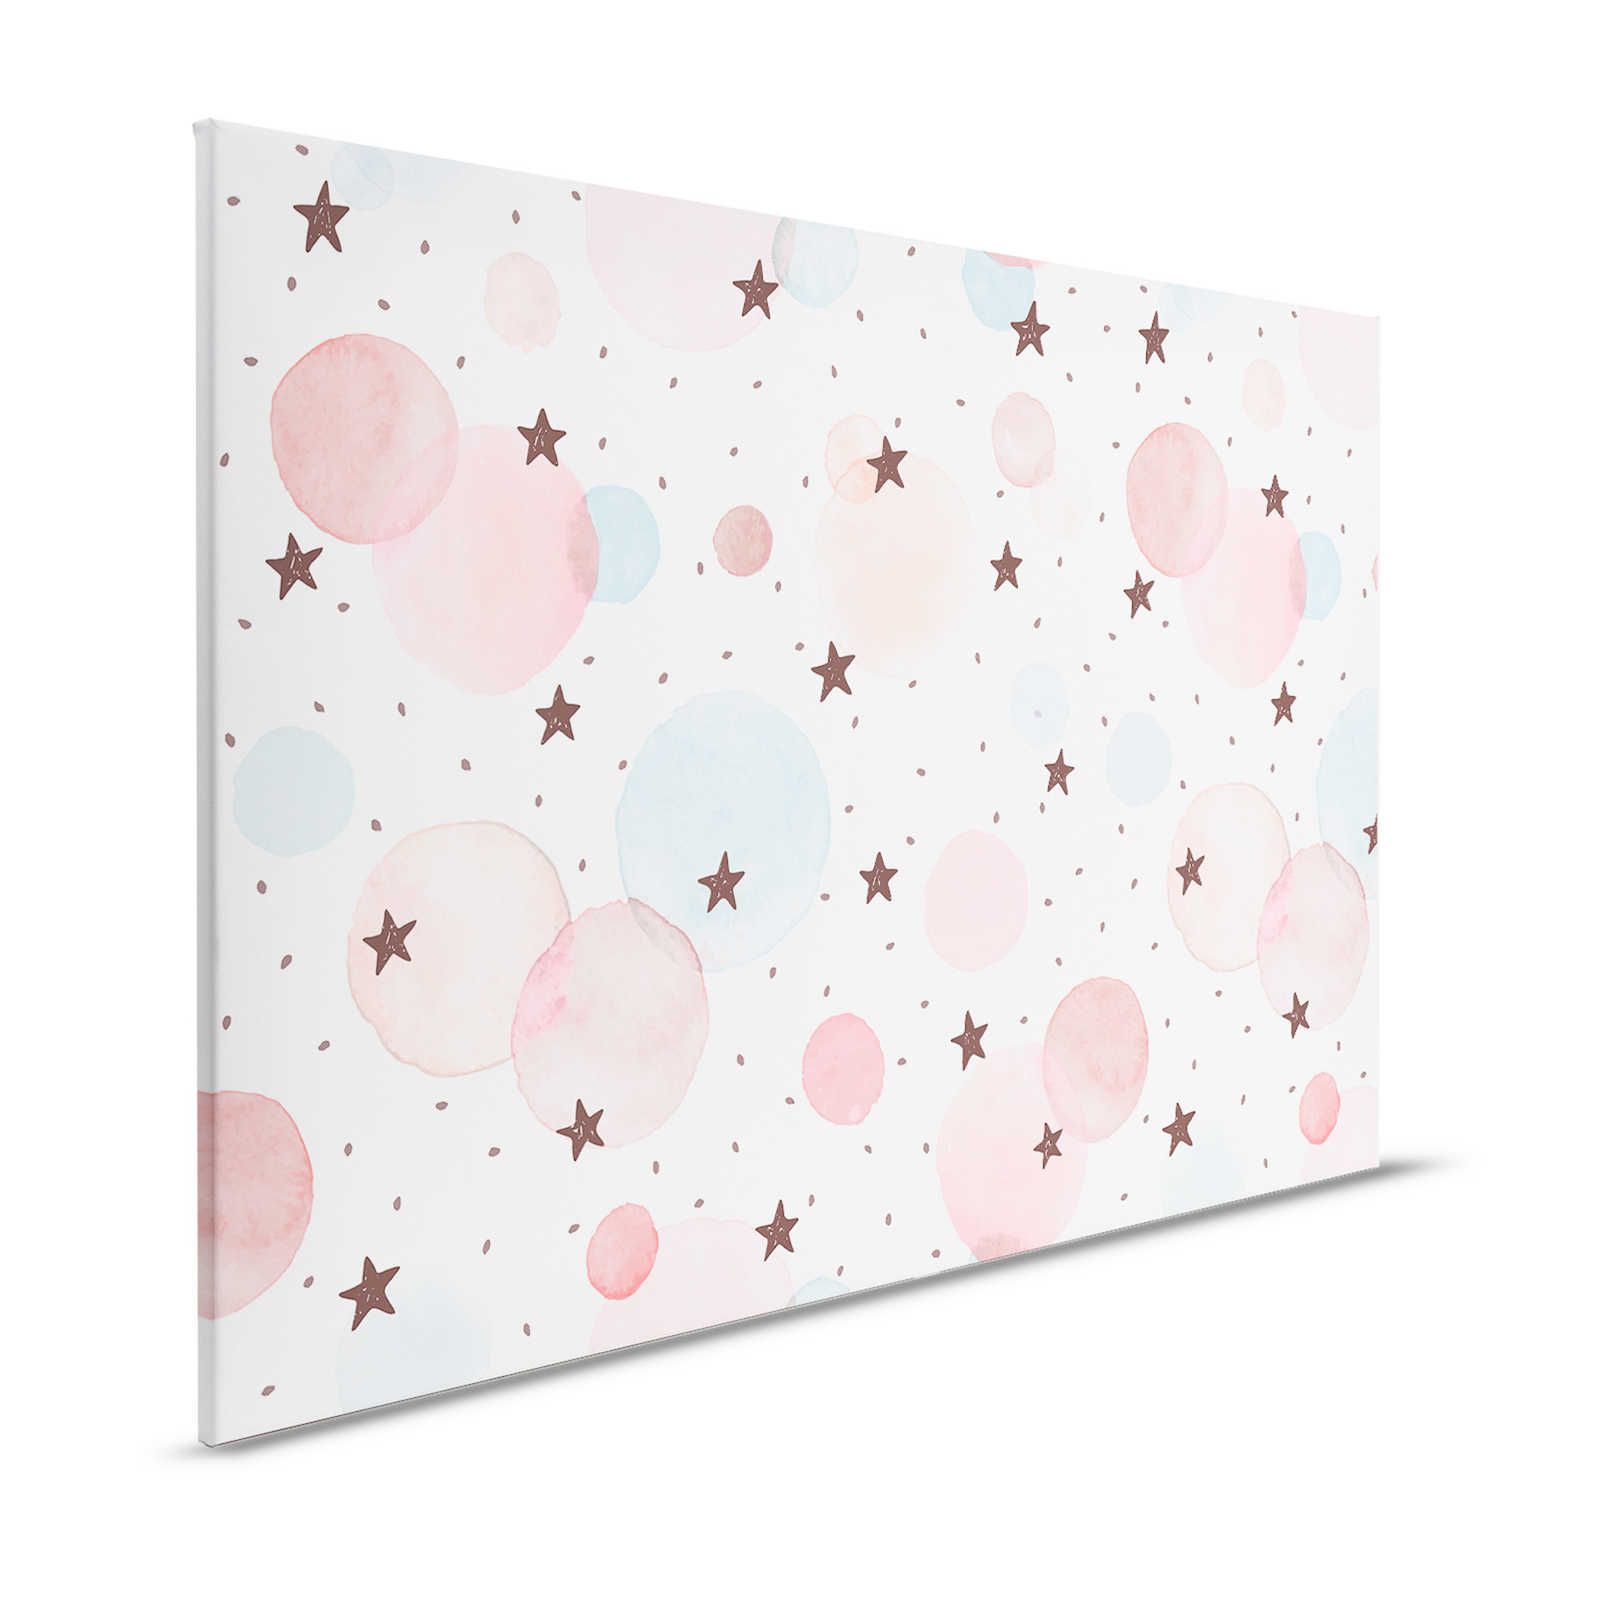 Canvas for children's room with stars, dots and circles - 120 cm x 80 cm
